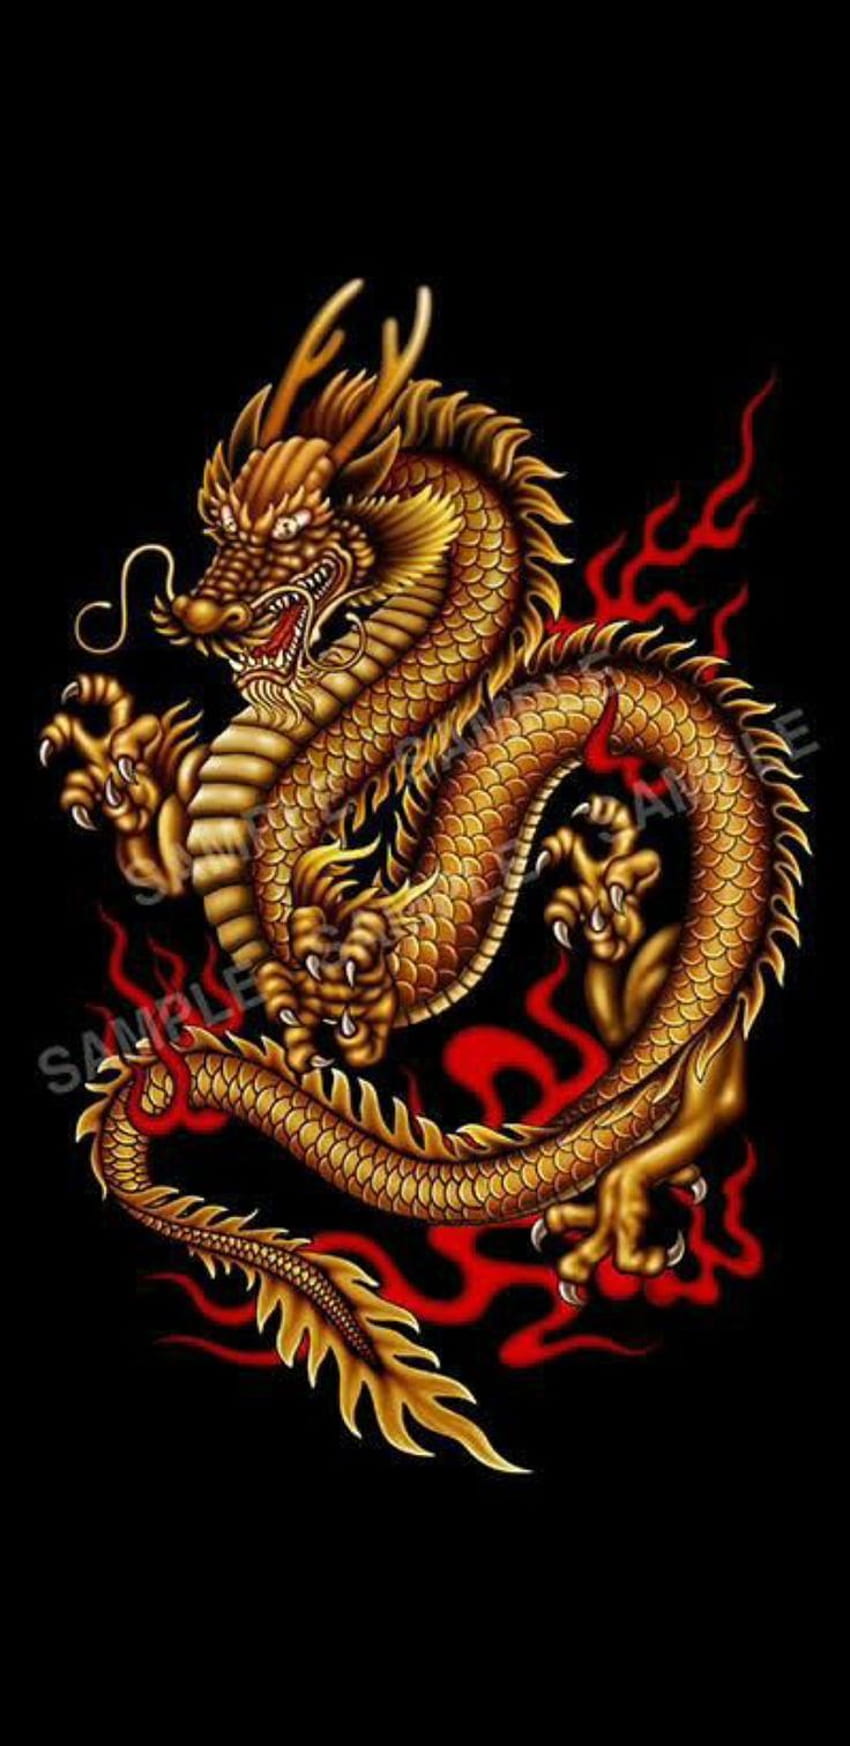 Cindy Sowers on Dragons in 2021. Chinese dragon art, Dragon artwork, Dragon artwork fantasy, Golden Chinese Dragon HD phone wallpaper